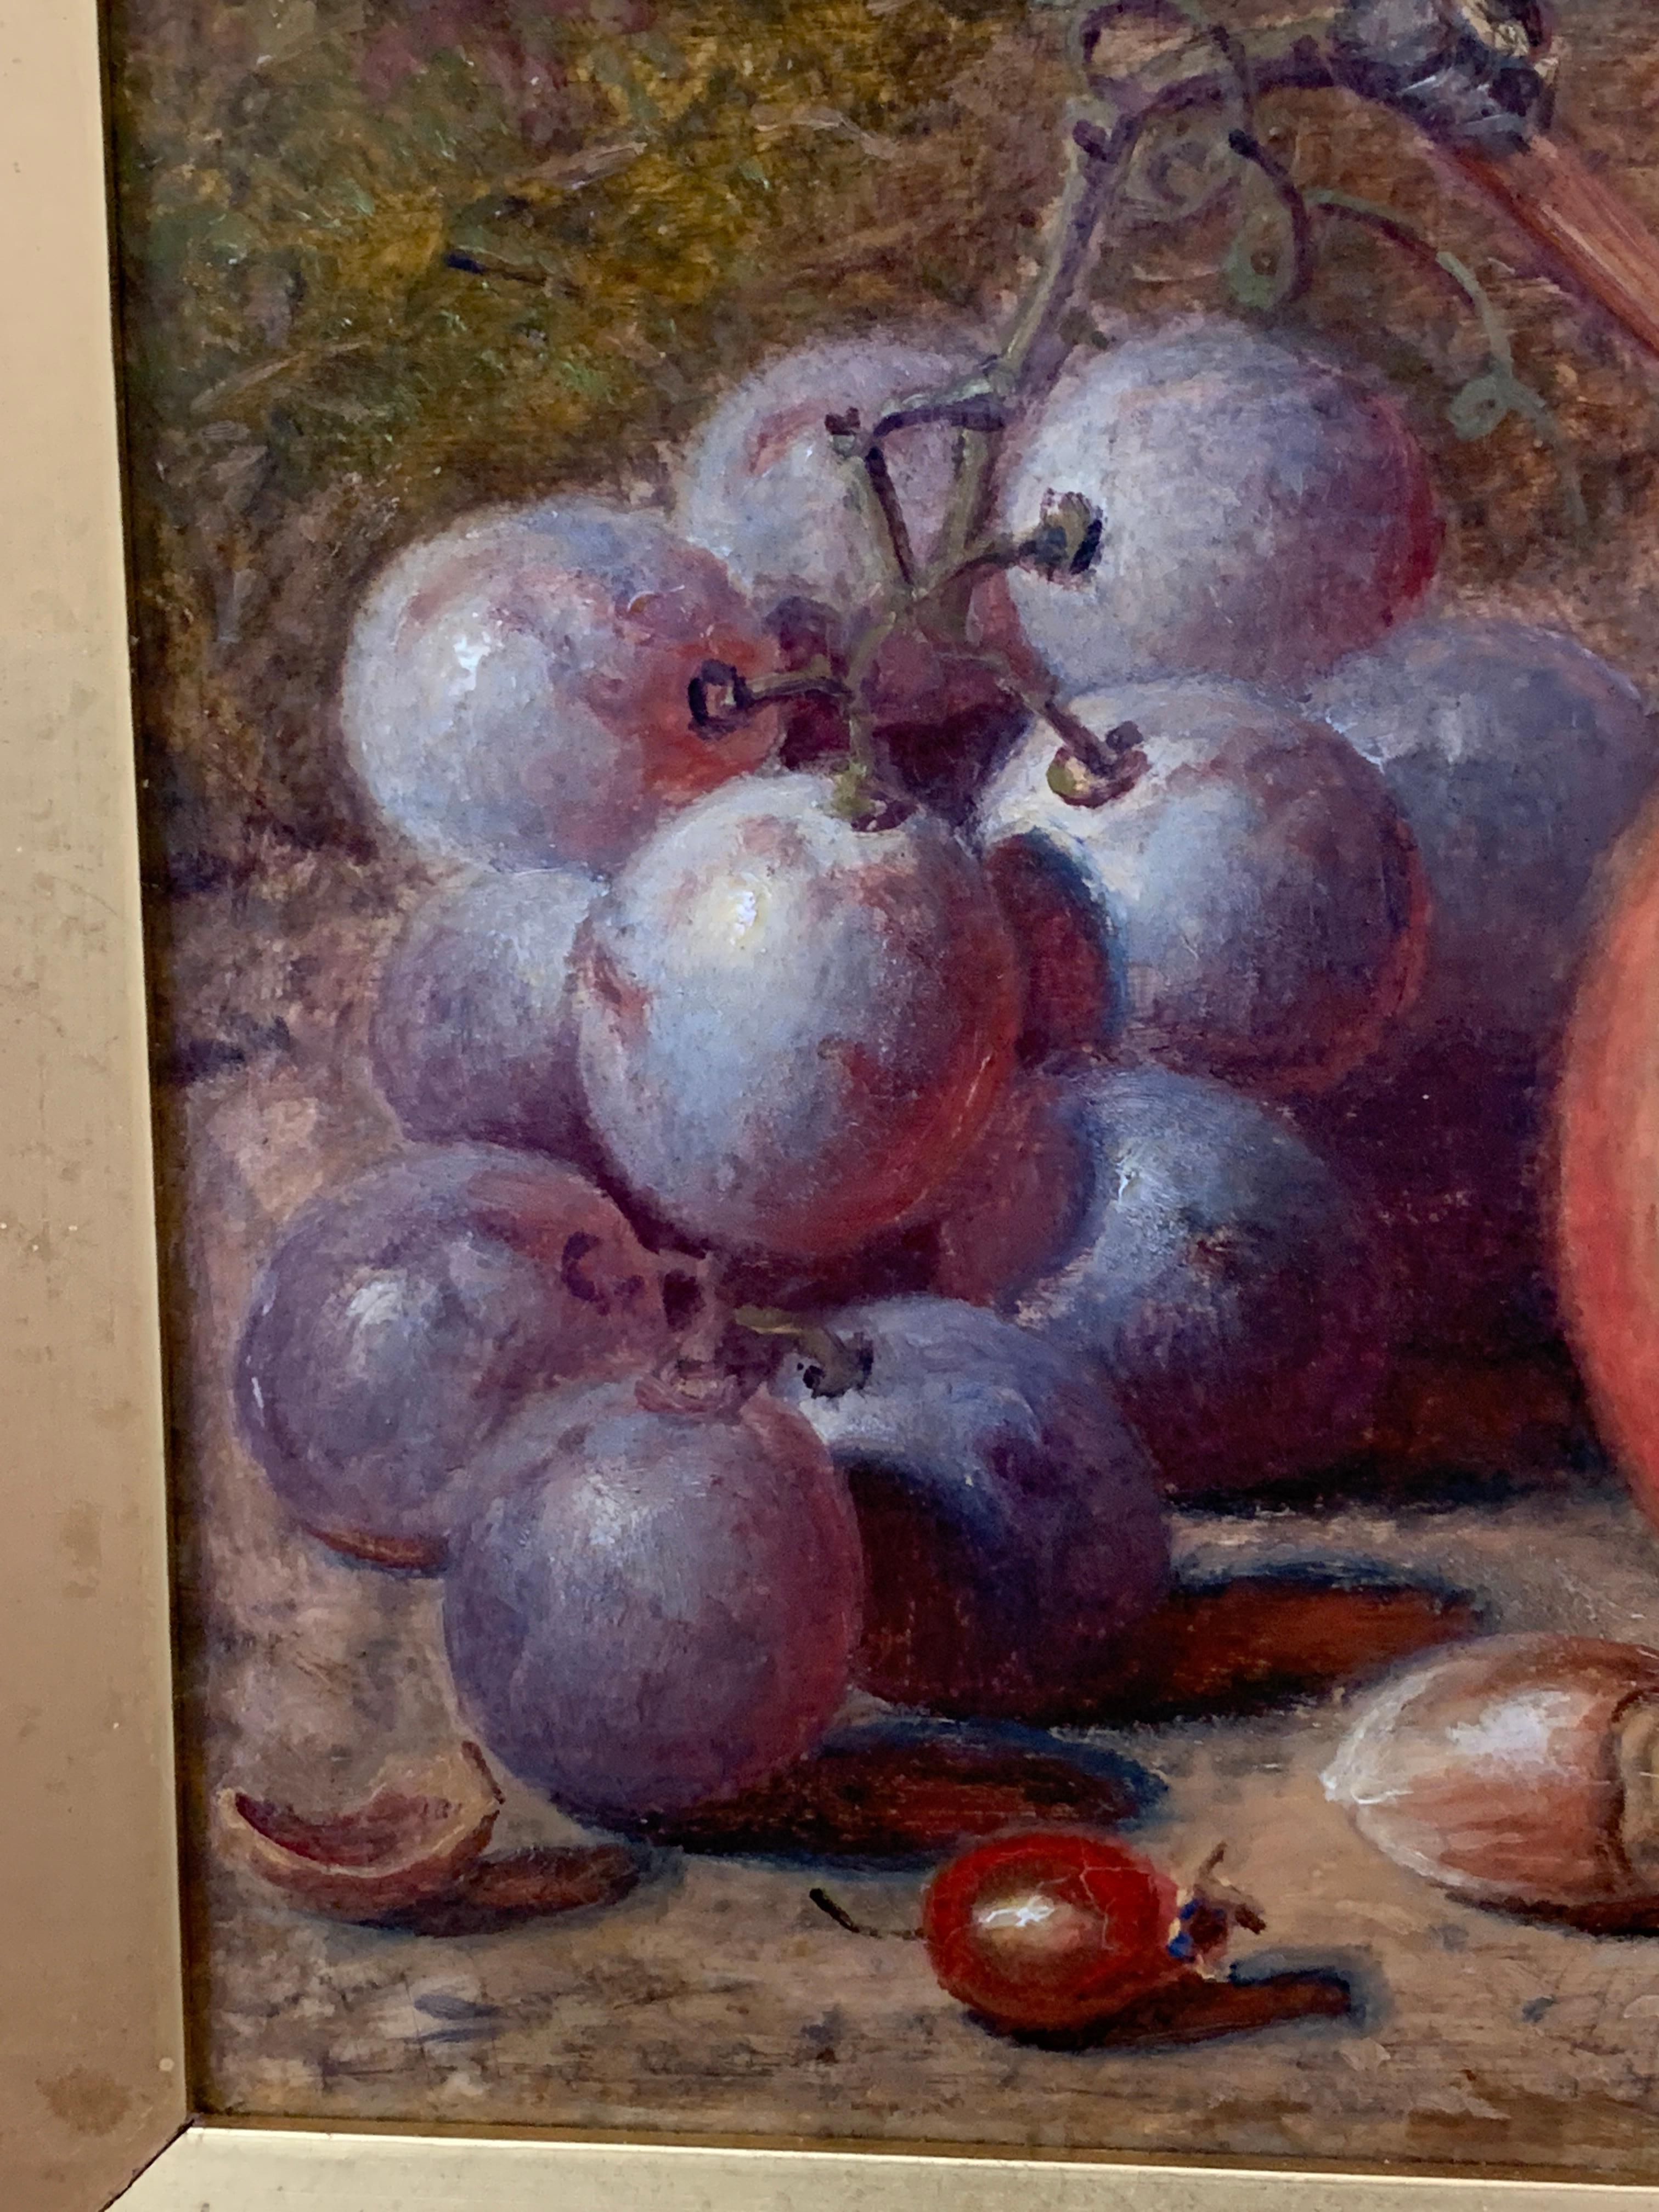 Victorian late 19th century English still life of Grapes, apple, hazelnut etc - Brown Figurative Painting by Charles Archer